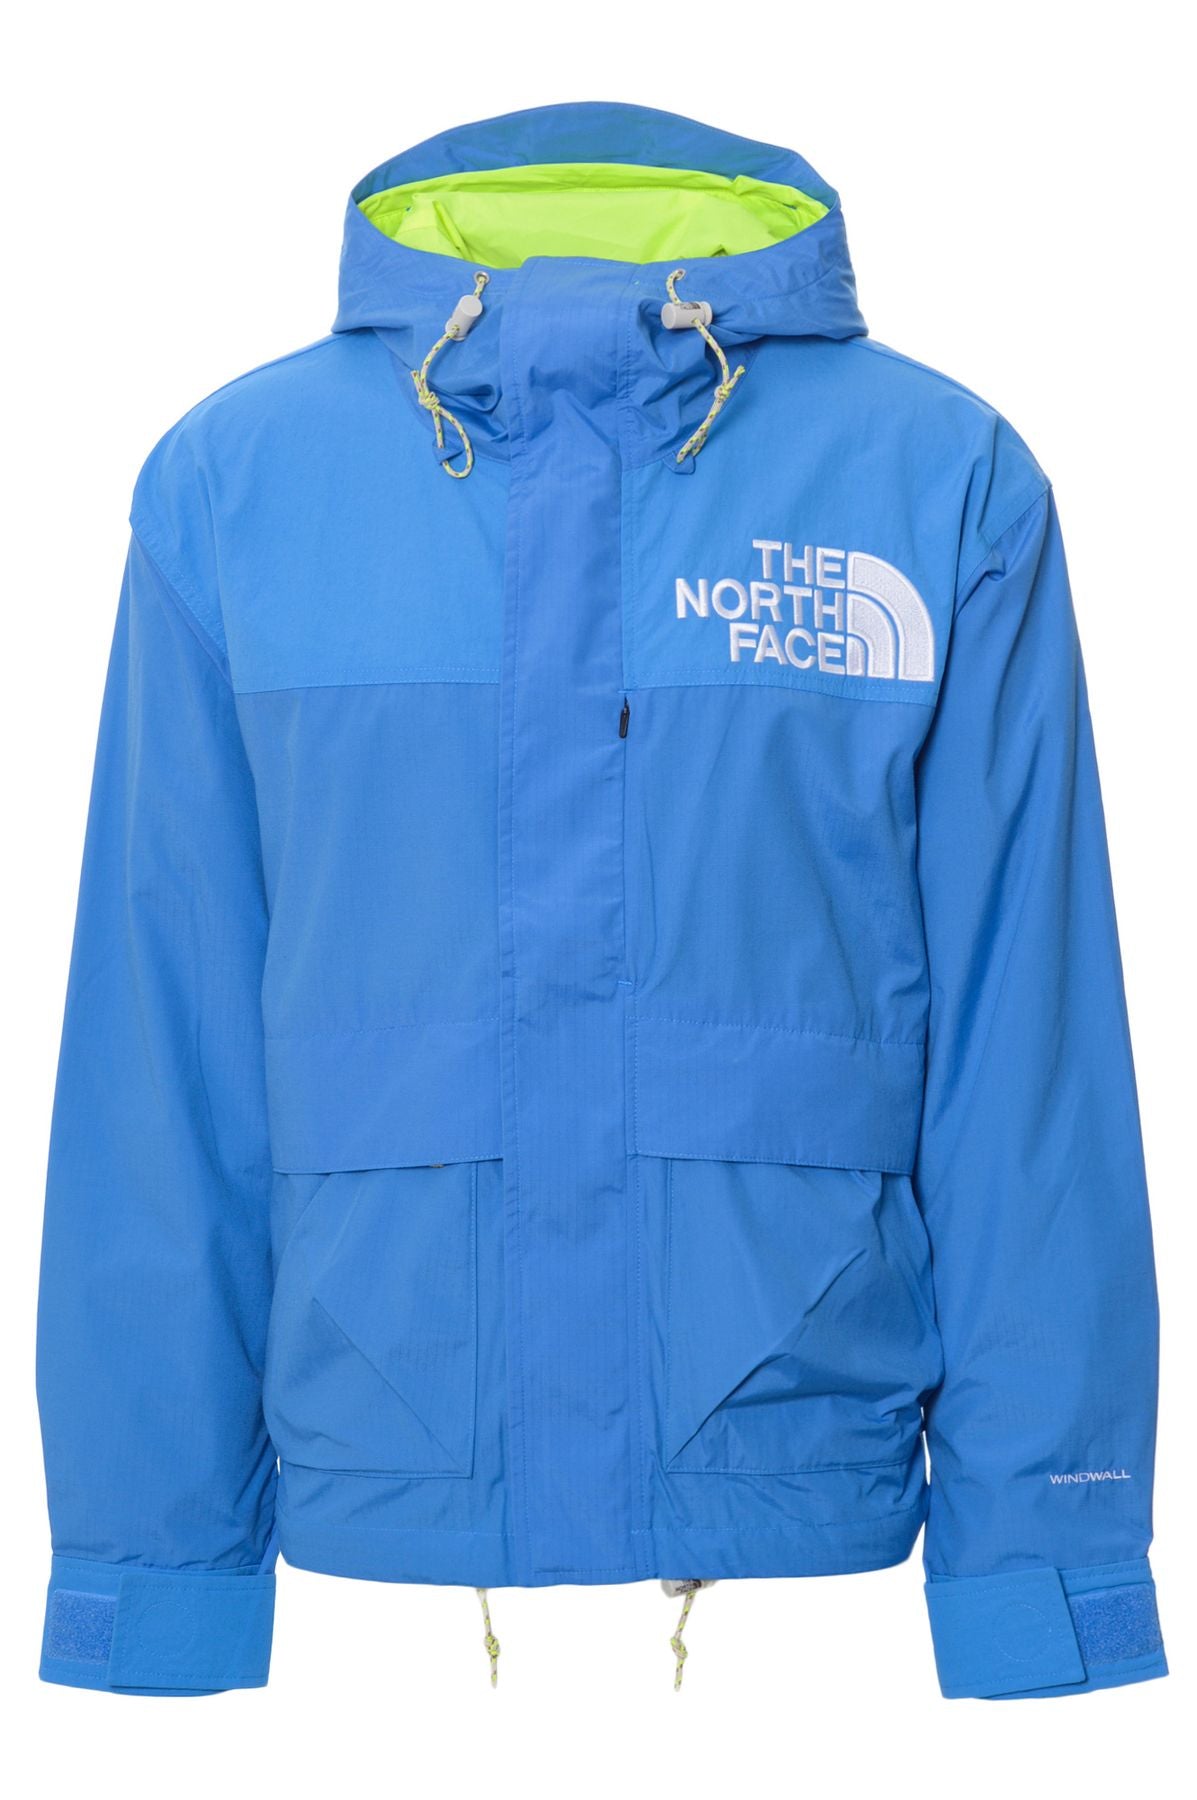 THE NORTH FACE Spring/Summer Polyester Jackets